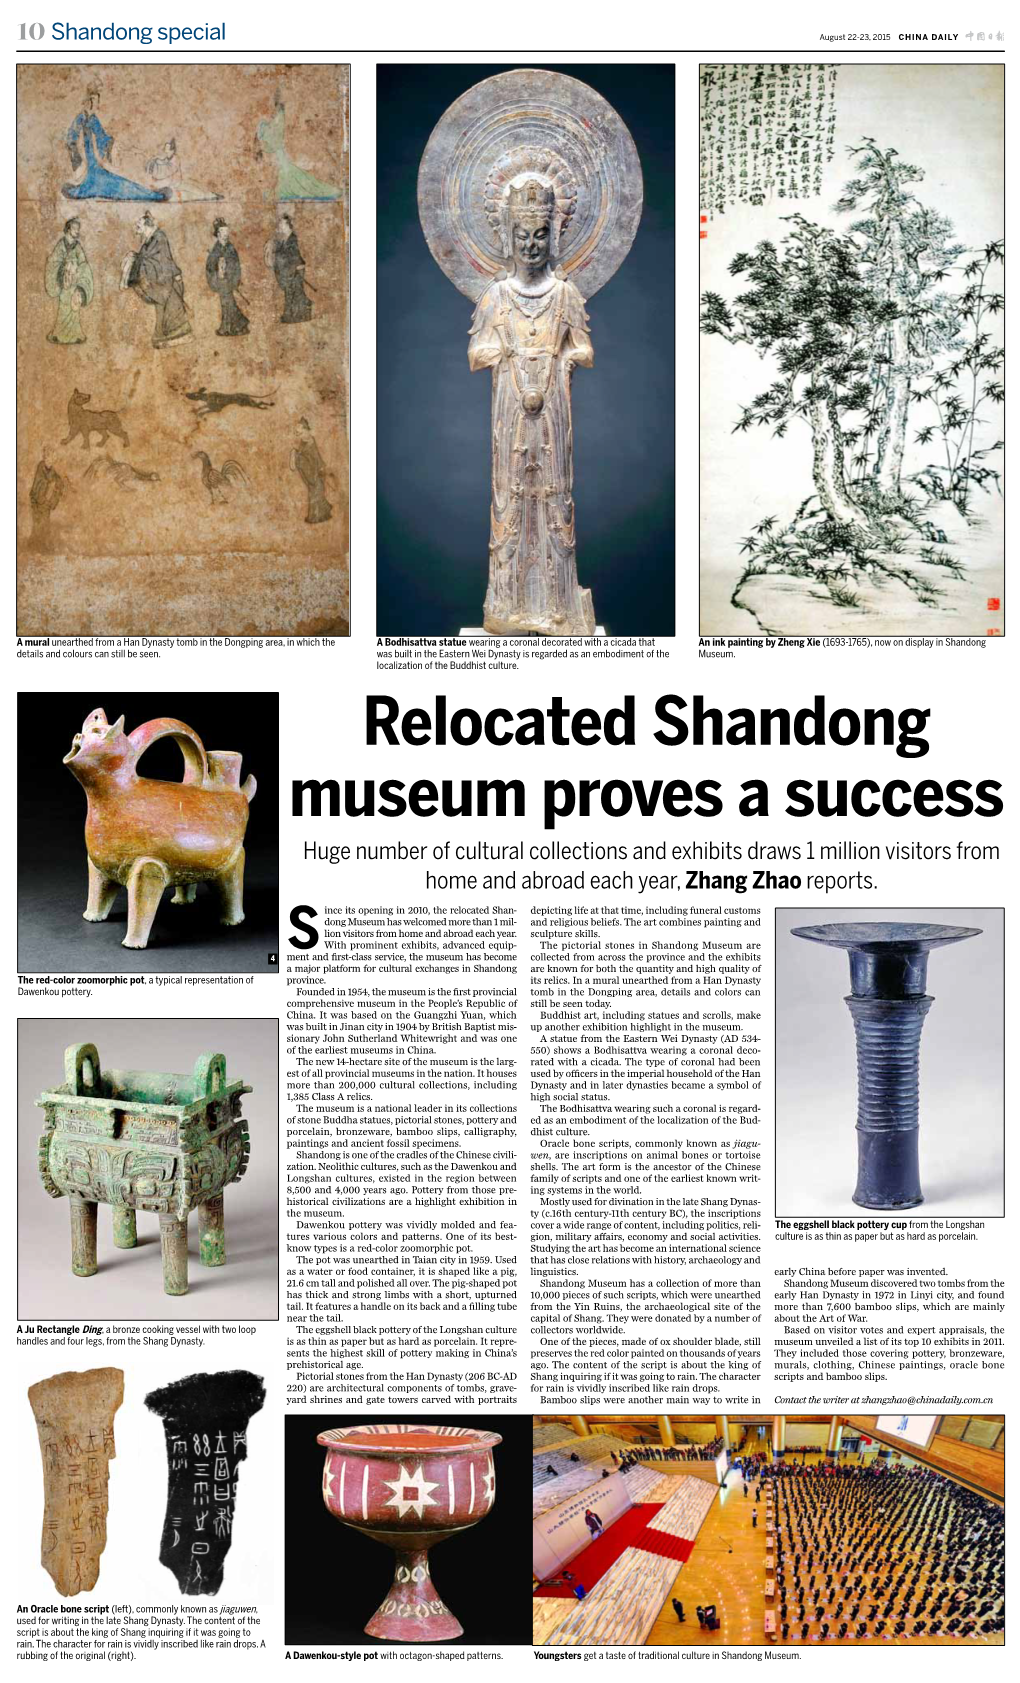 Relocated Shandong Museum Proves a Success